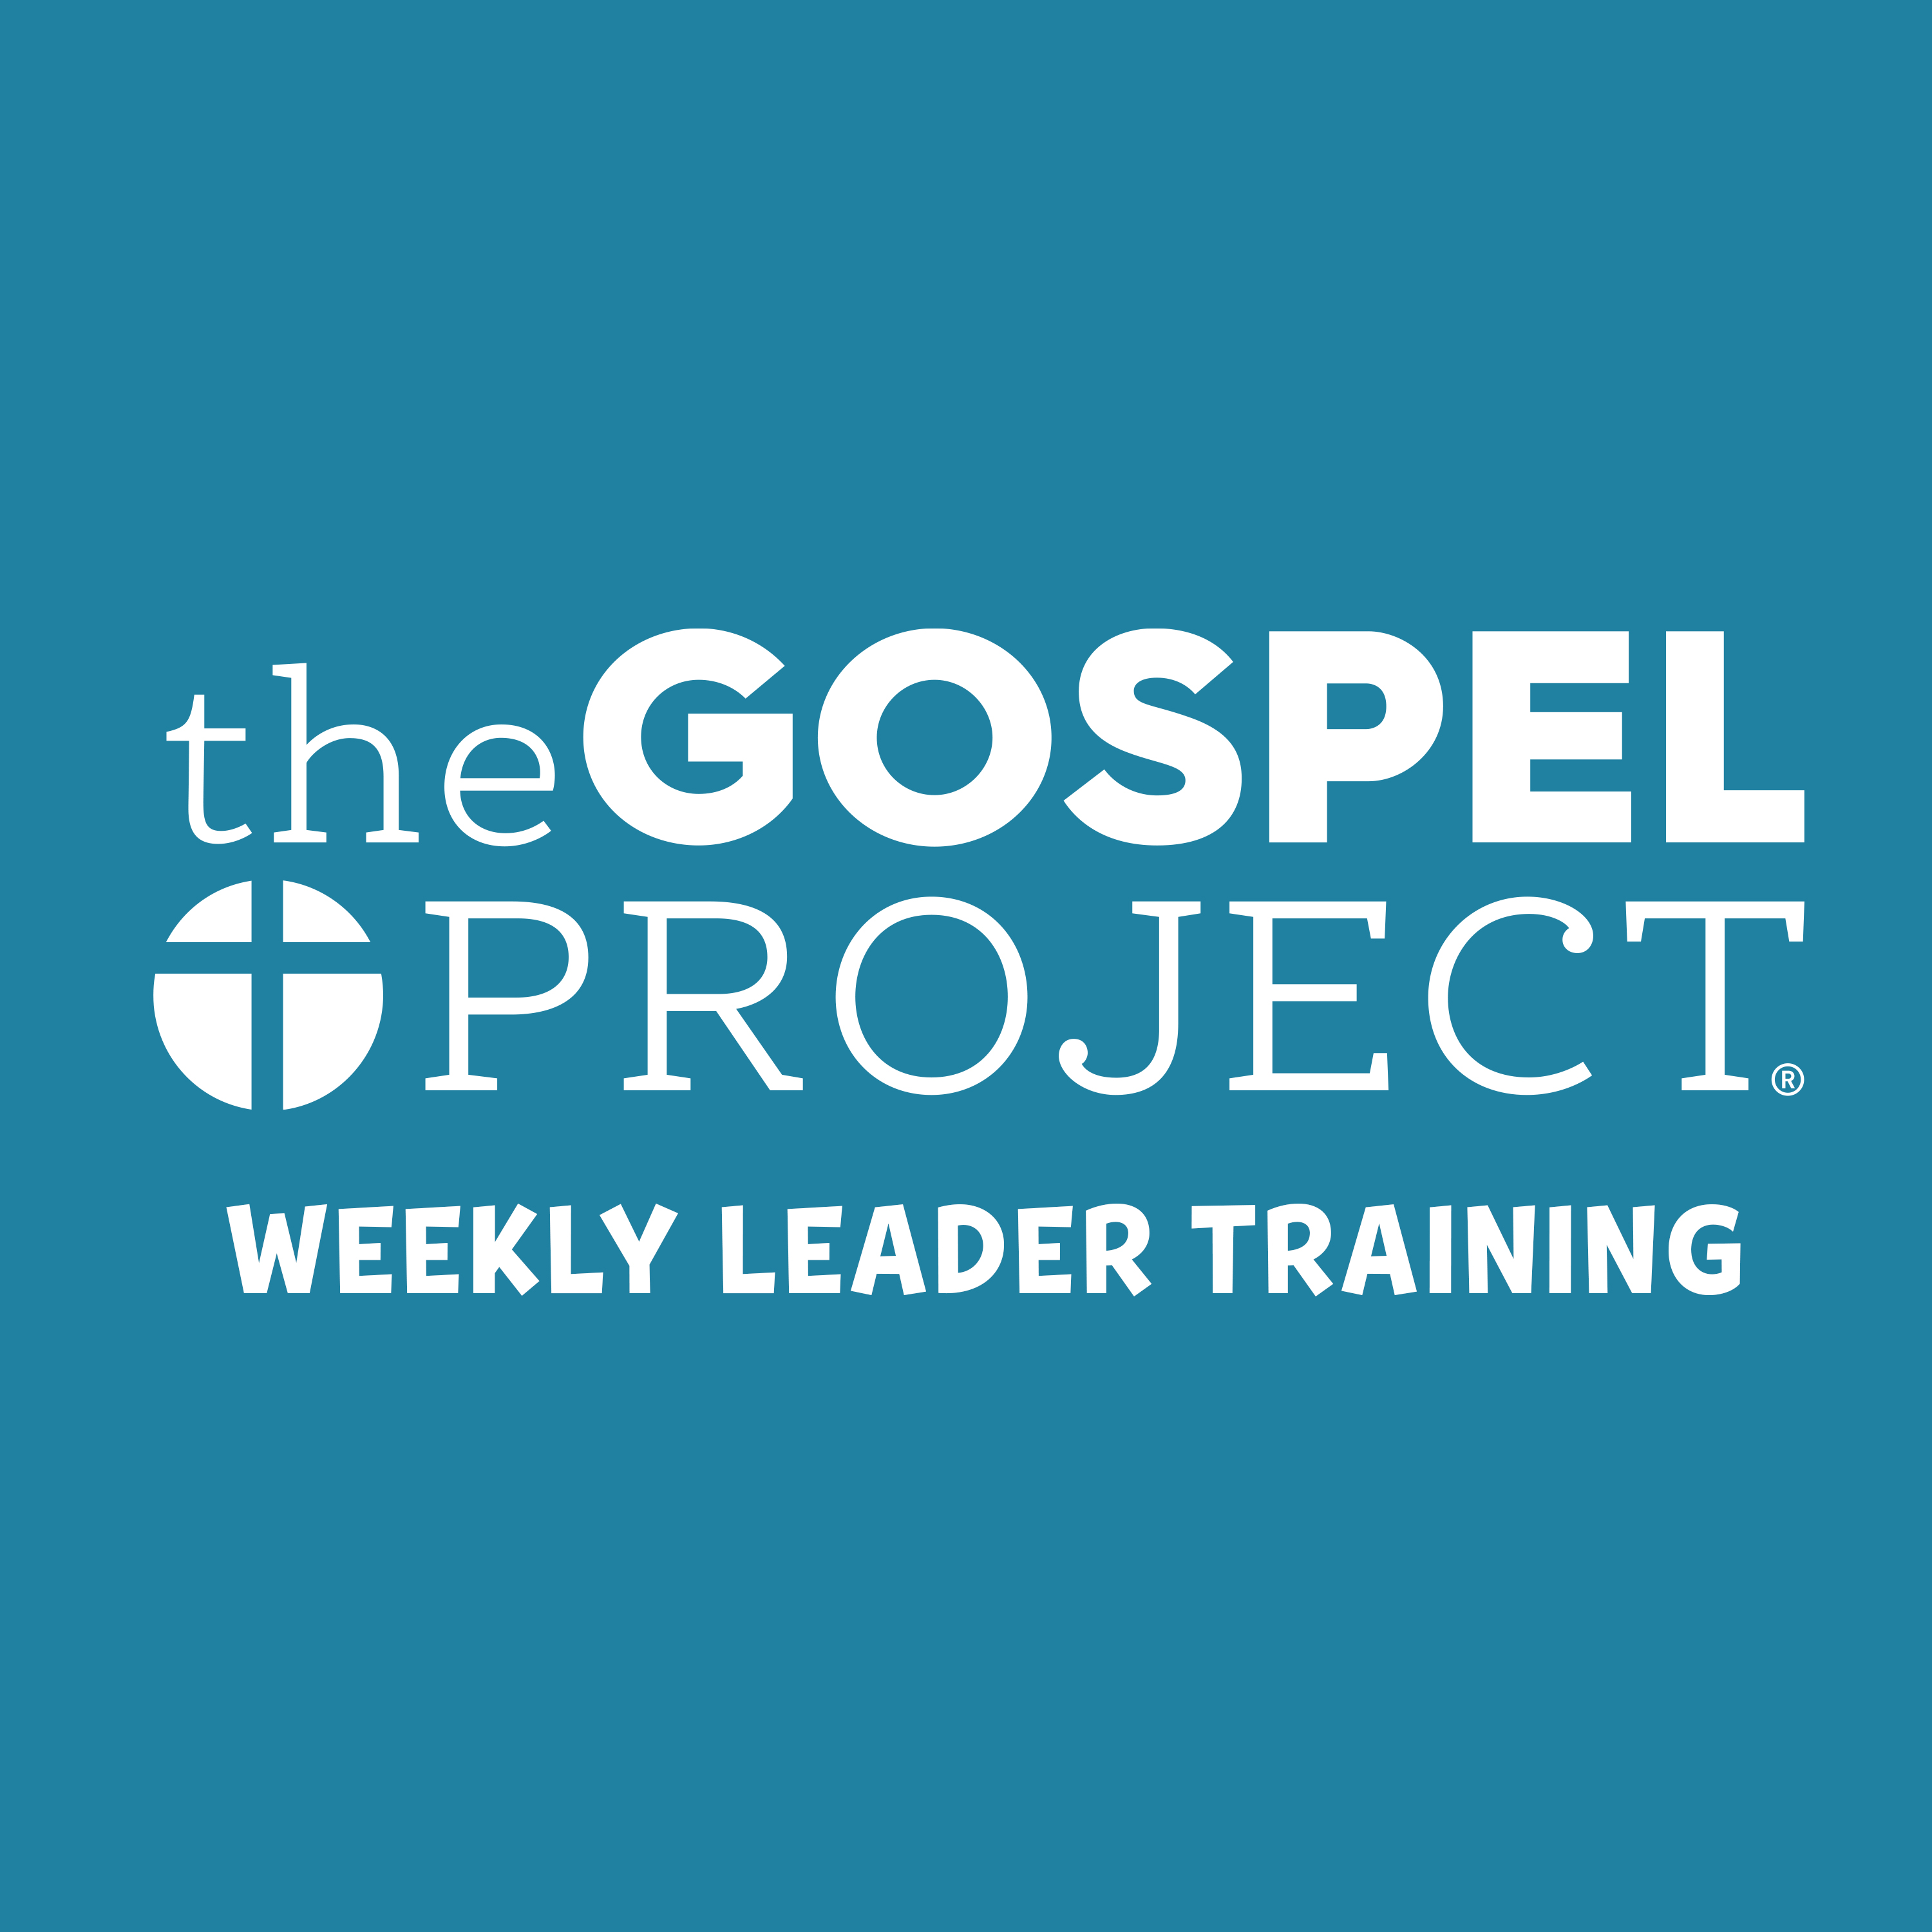 The Gospel Project for Kids Weekly Leader Training